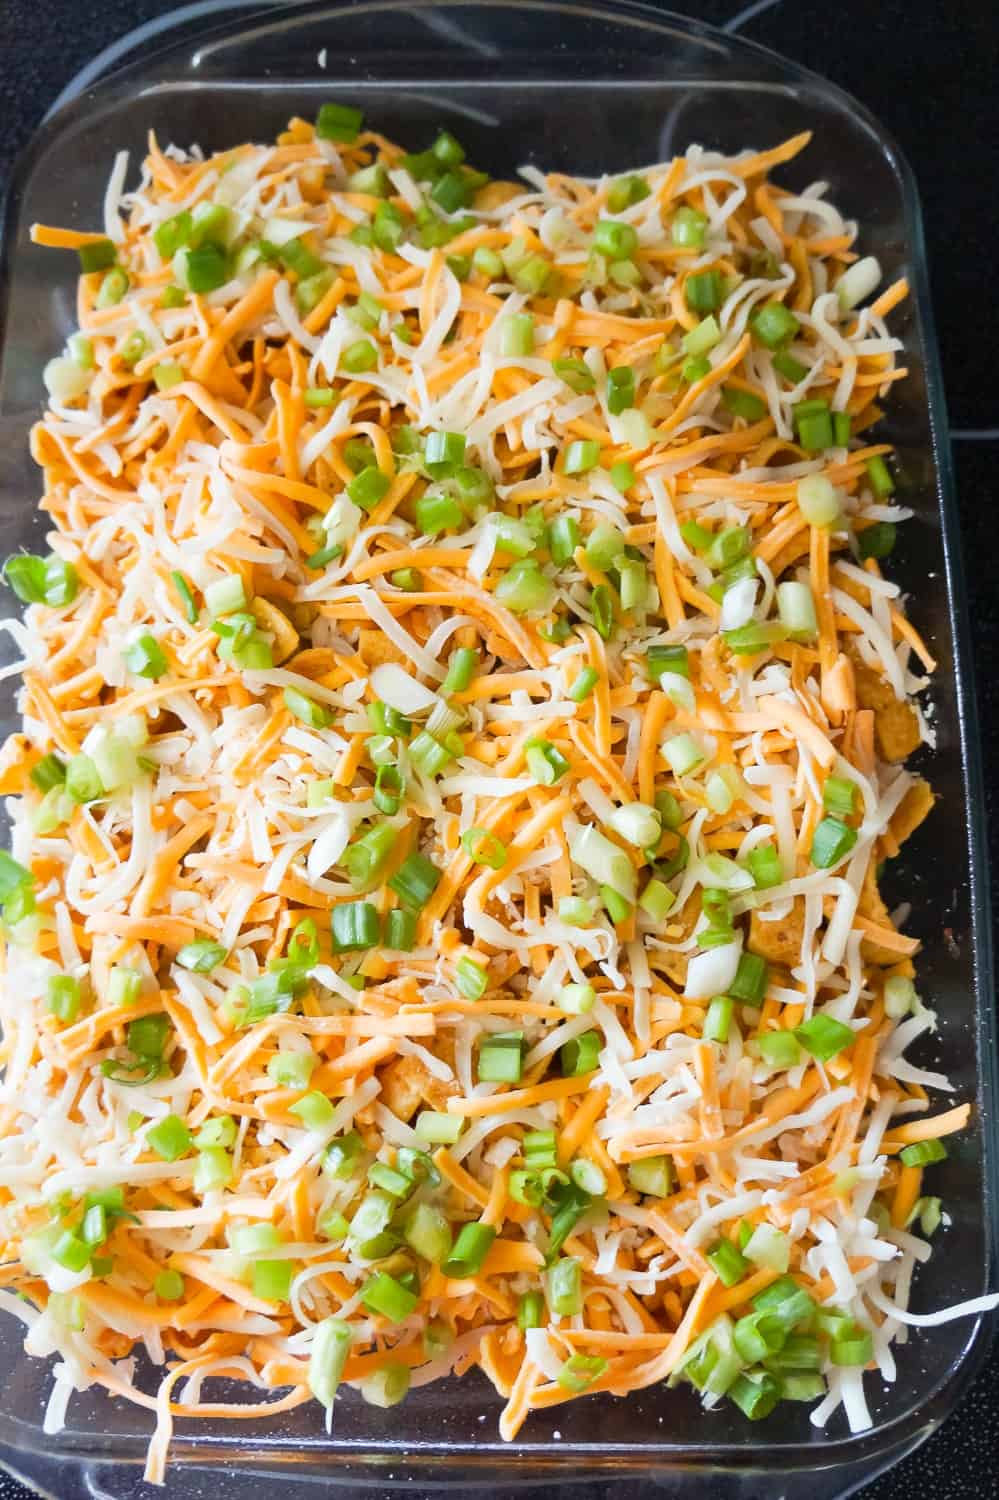 shredded cheese and green onions on top of Frito pie before baking